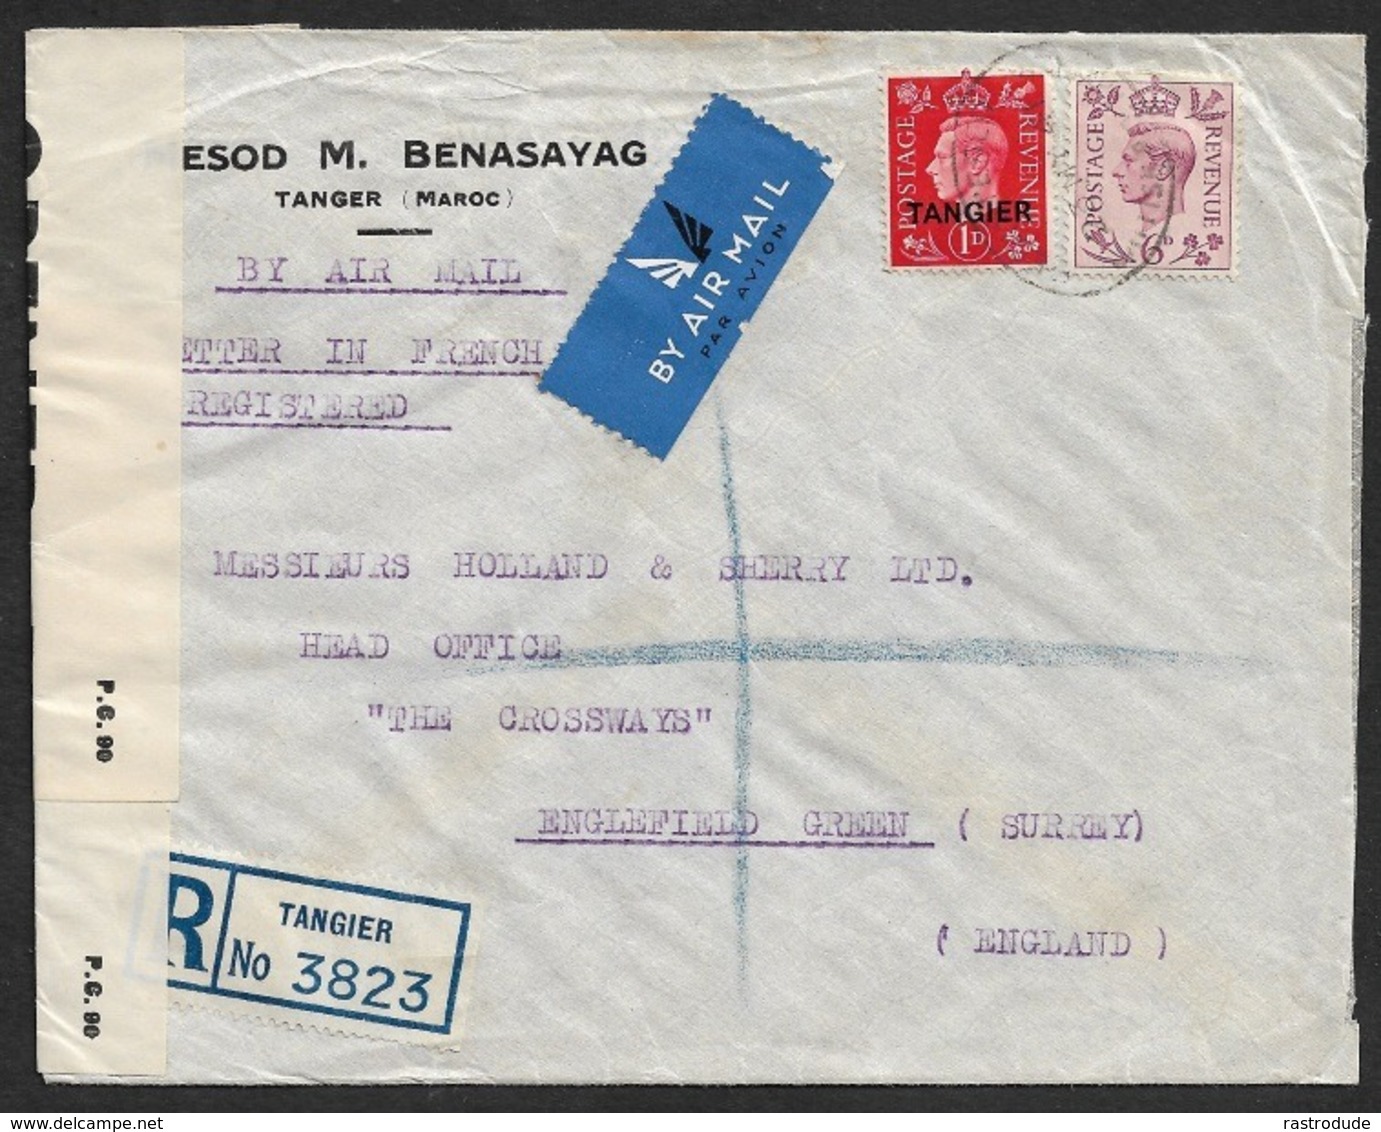 1940 - B.P.O TANGIER / GB Mixed Franking - Censored Registered Airmail To GB - Scarce - Morocco Agencies / Tangier (...-1958)